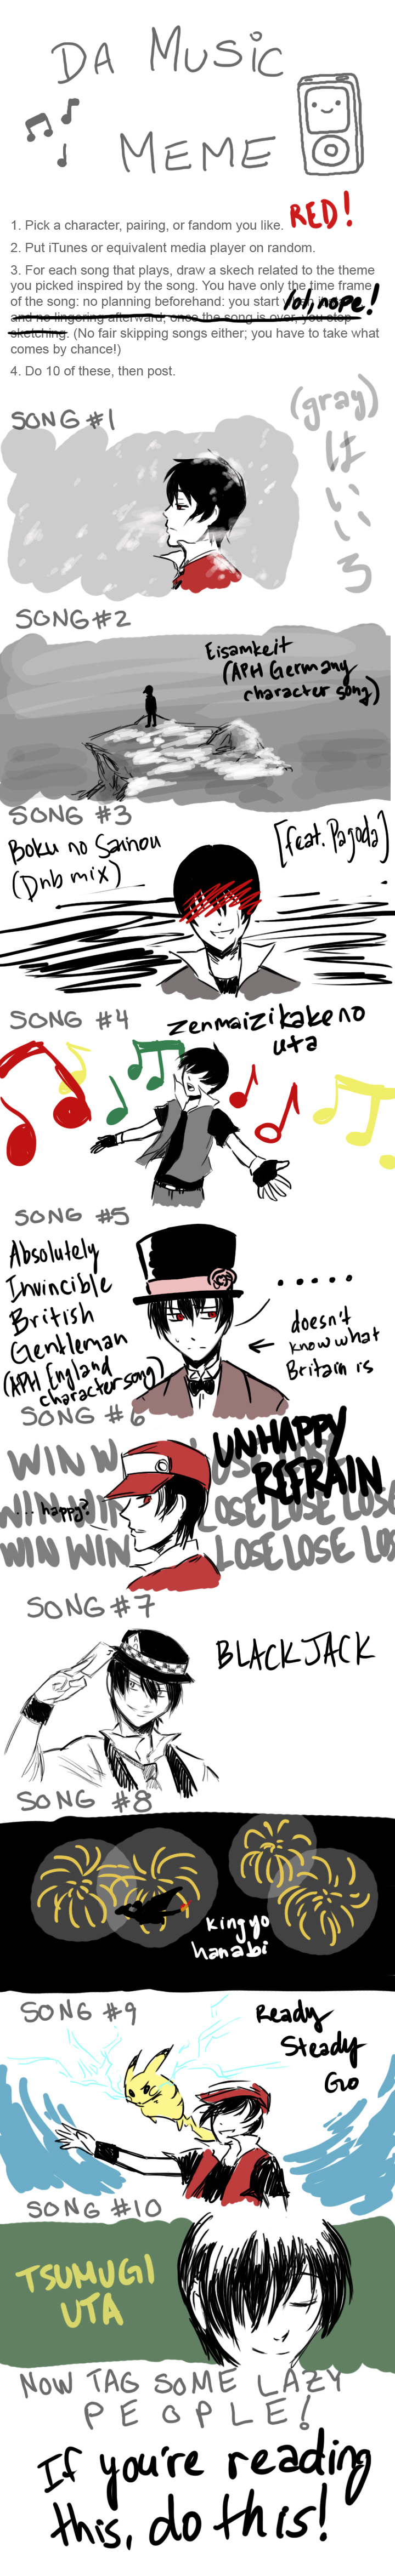 Music Meme feat. Red